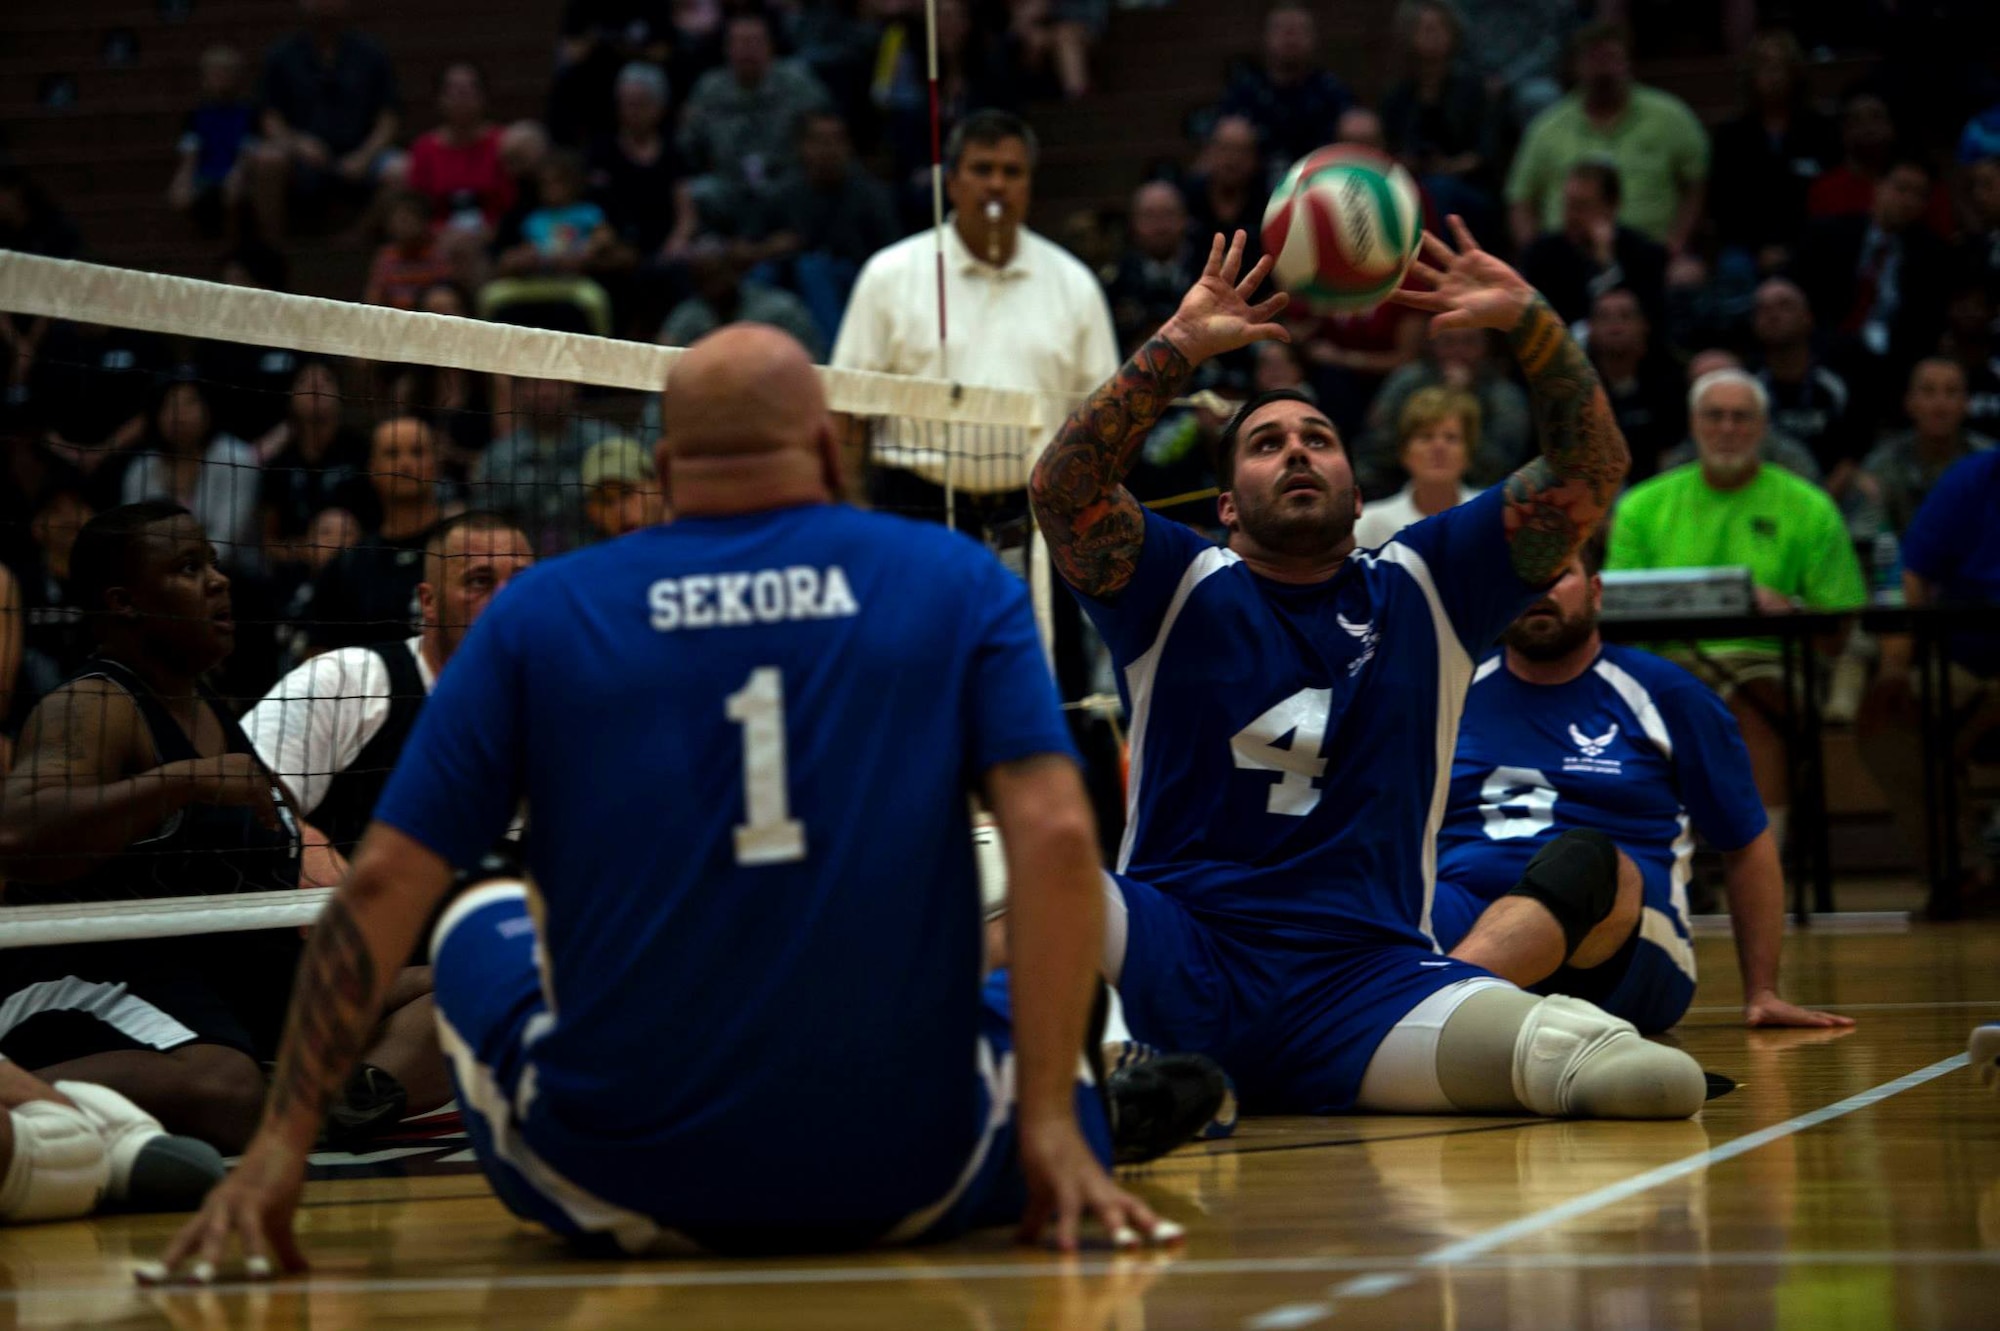 Air Force wounded warrior Stephen Malits hits a volleyball during a game of sitting volley ball against the Army wounded warrior team at the Olympic Training Center in Colorado Springs, Colorado, Sept. 28th, 2014. The 2014 Warrior Games features wounded athletes from throughout the Department of Defense who compete in Olympic style events for their respective military branch. The goal of the games is to help highlight the limitless potential of warriors through competitive sports.(U.S. Air Force photo by Airman 1st Class Scott Jackson) 